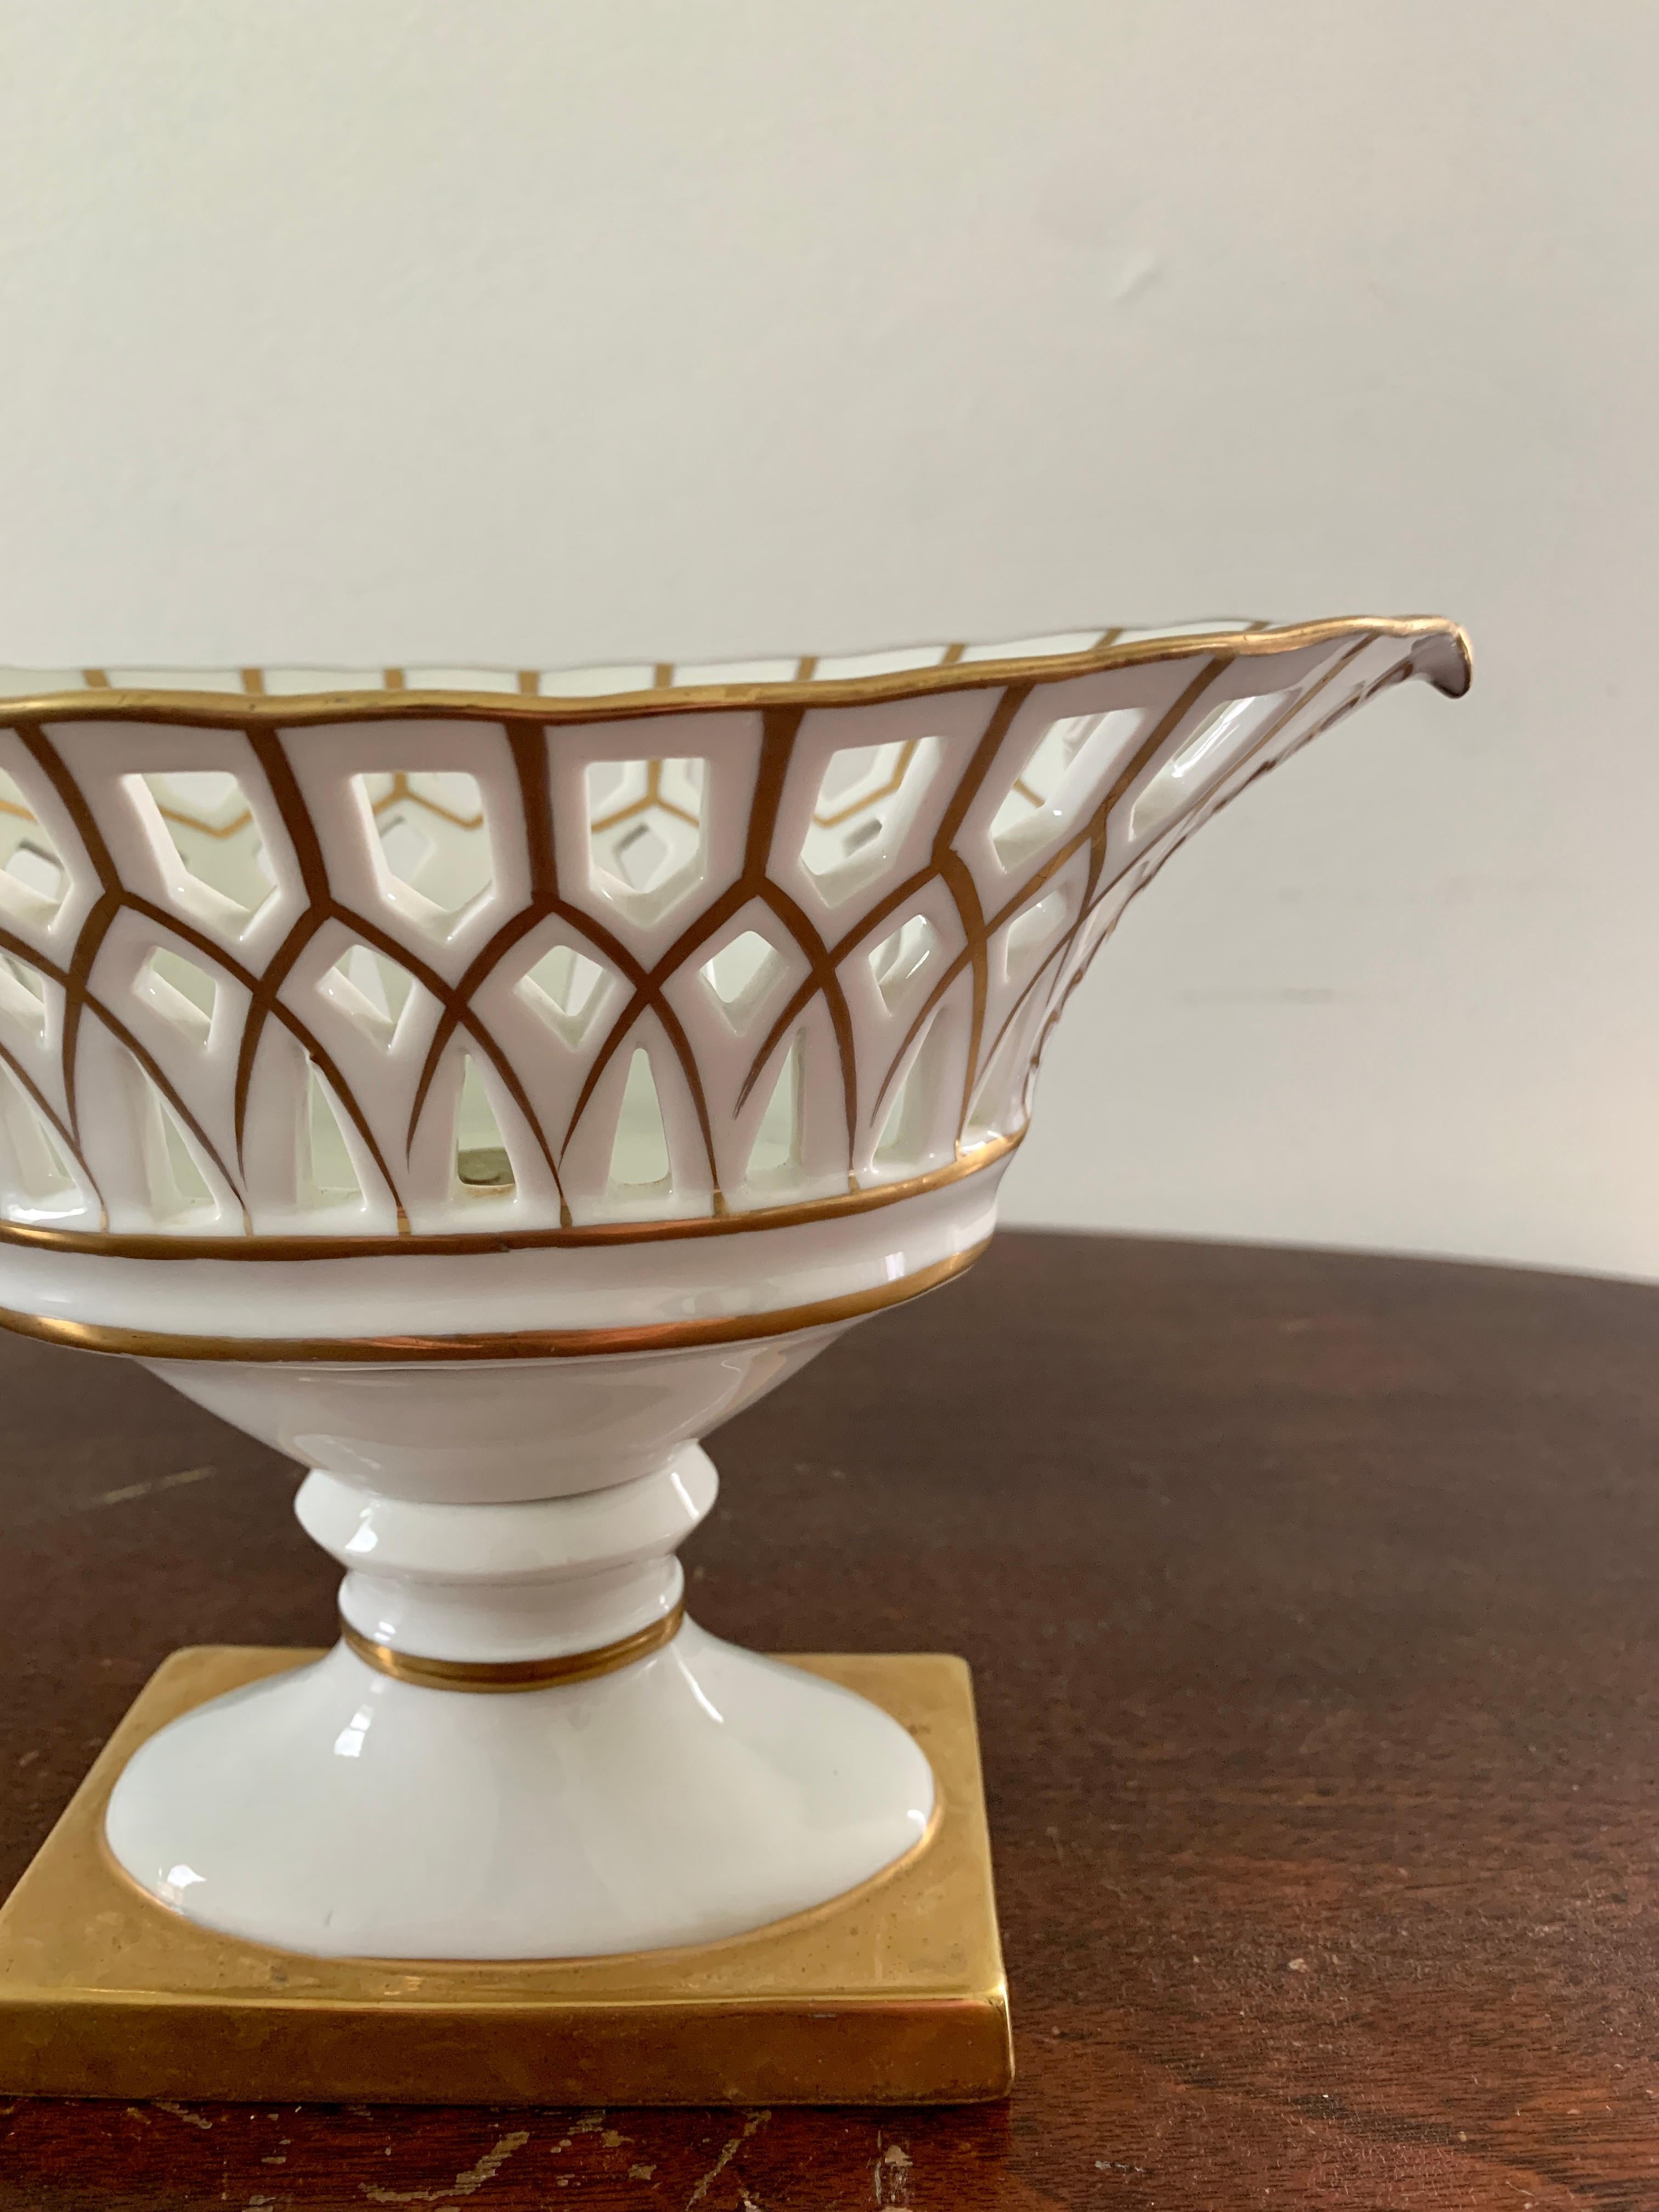 Reticulated Regency White Porcelain and Gold Gilt Basket Compote In Good Condition For Sale In Elkhart, IN